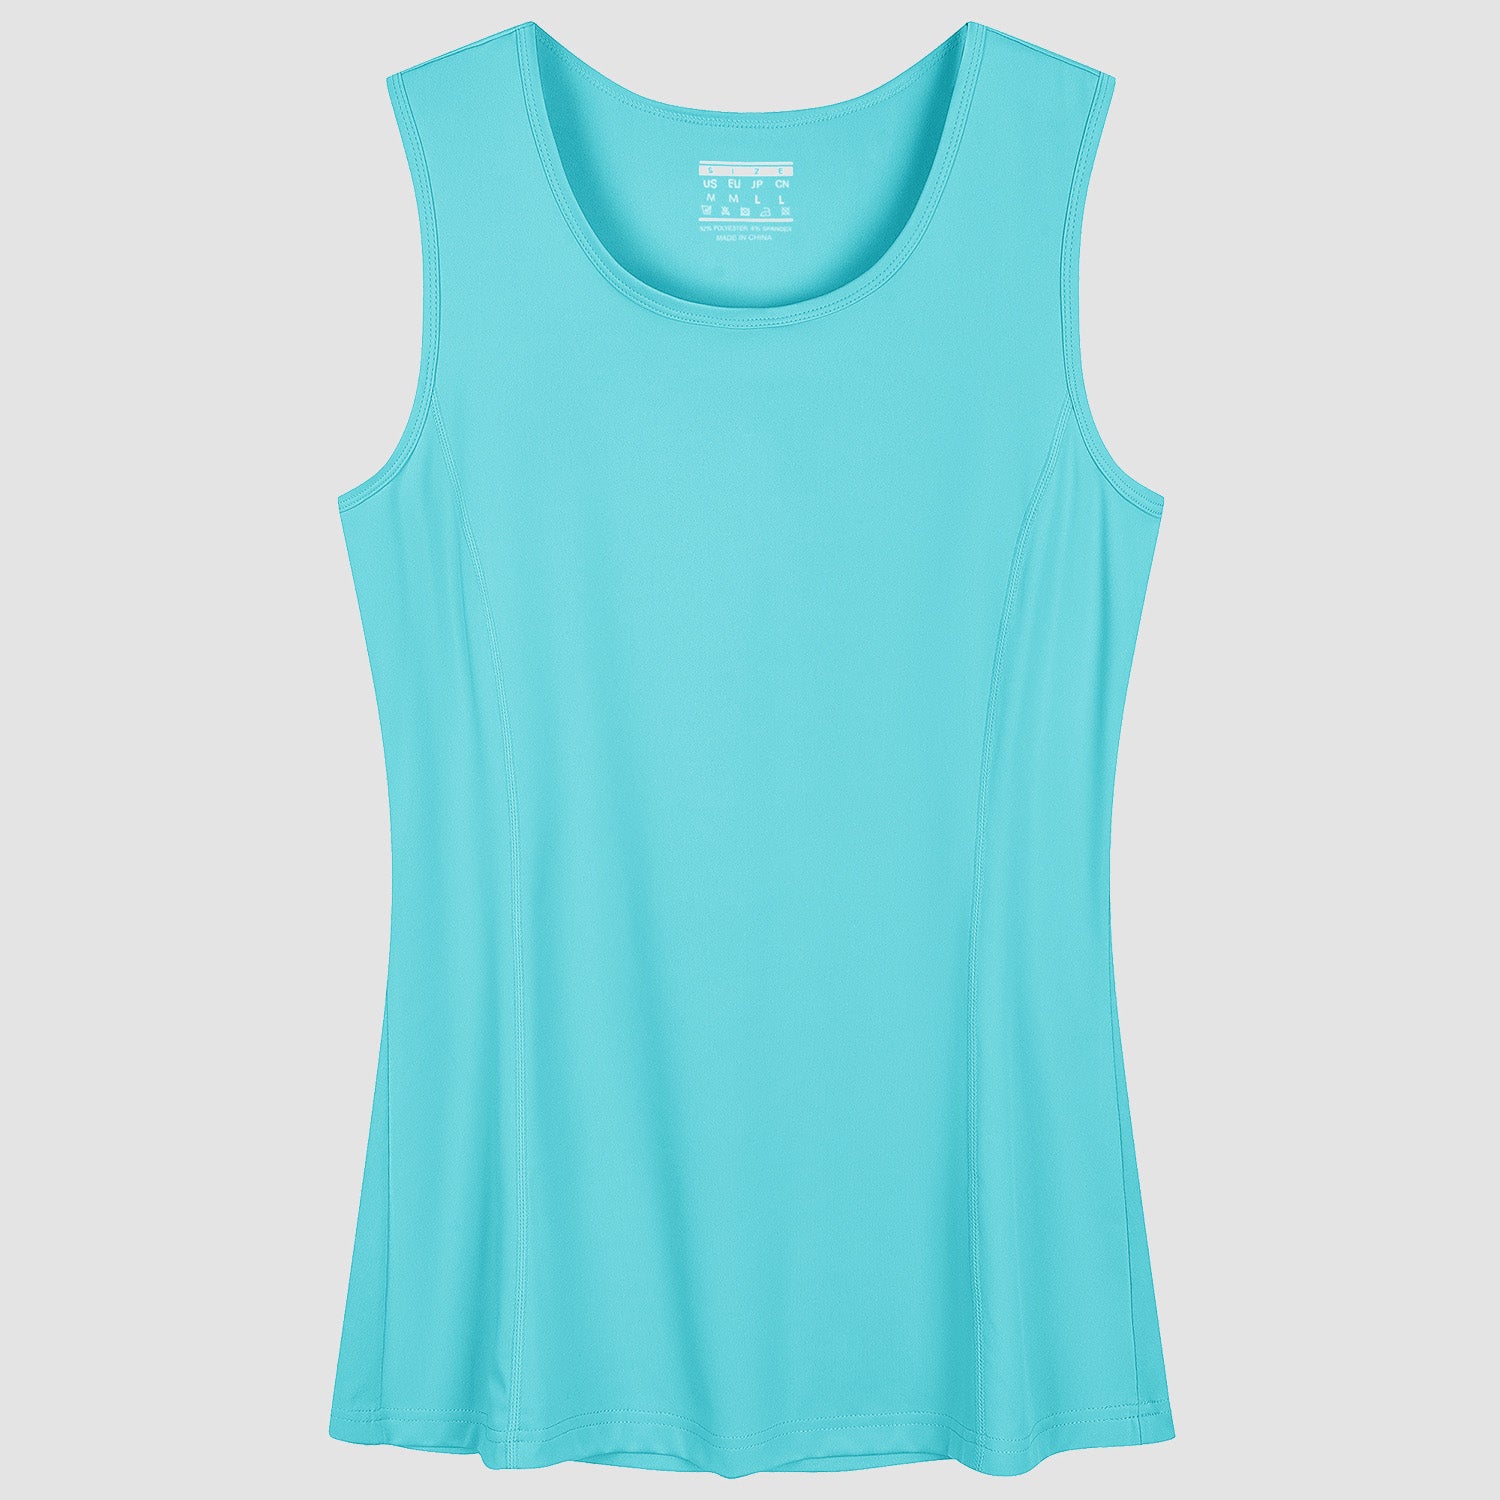  Gym Running Workout Tank Tops Turquoise-Blue-Pink